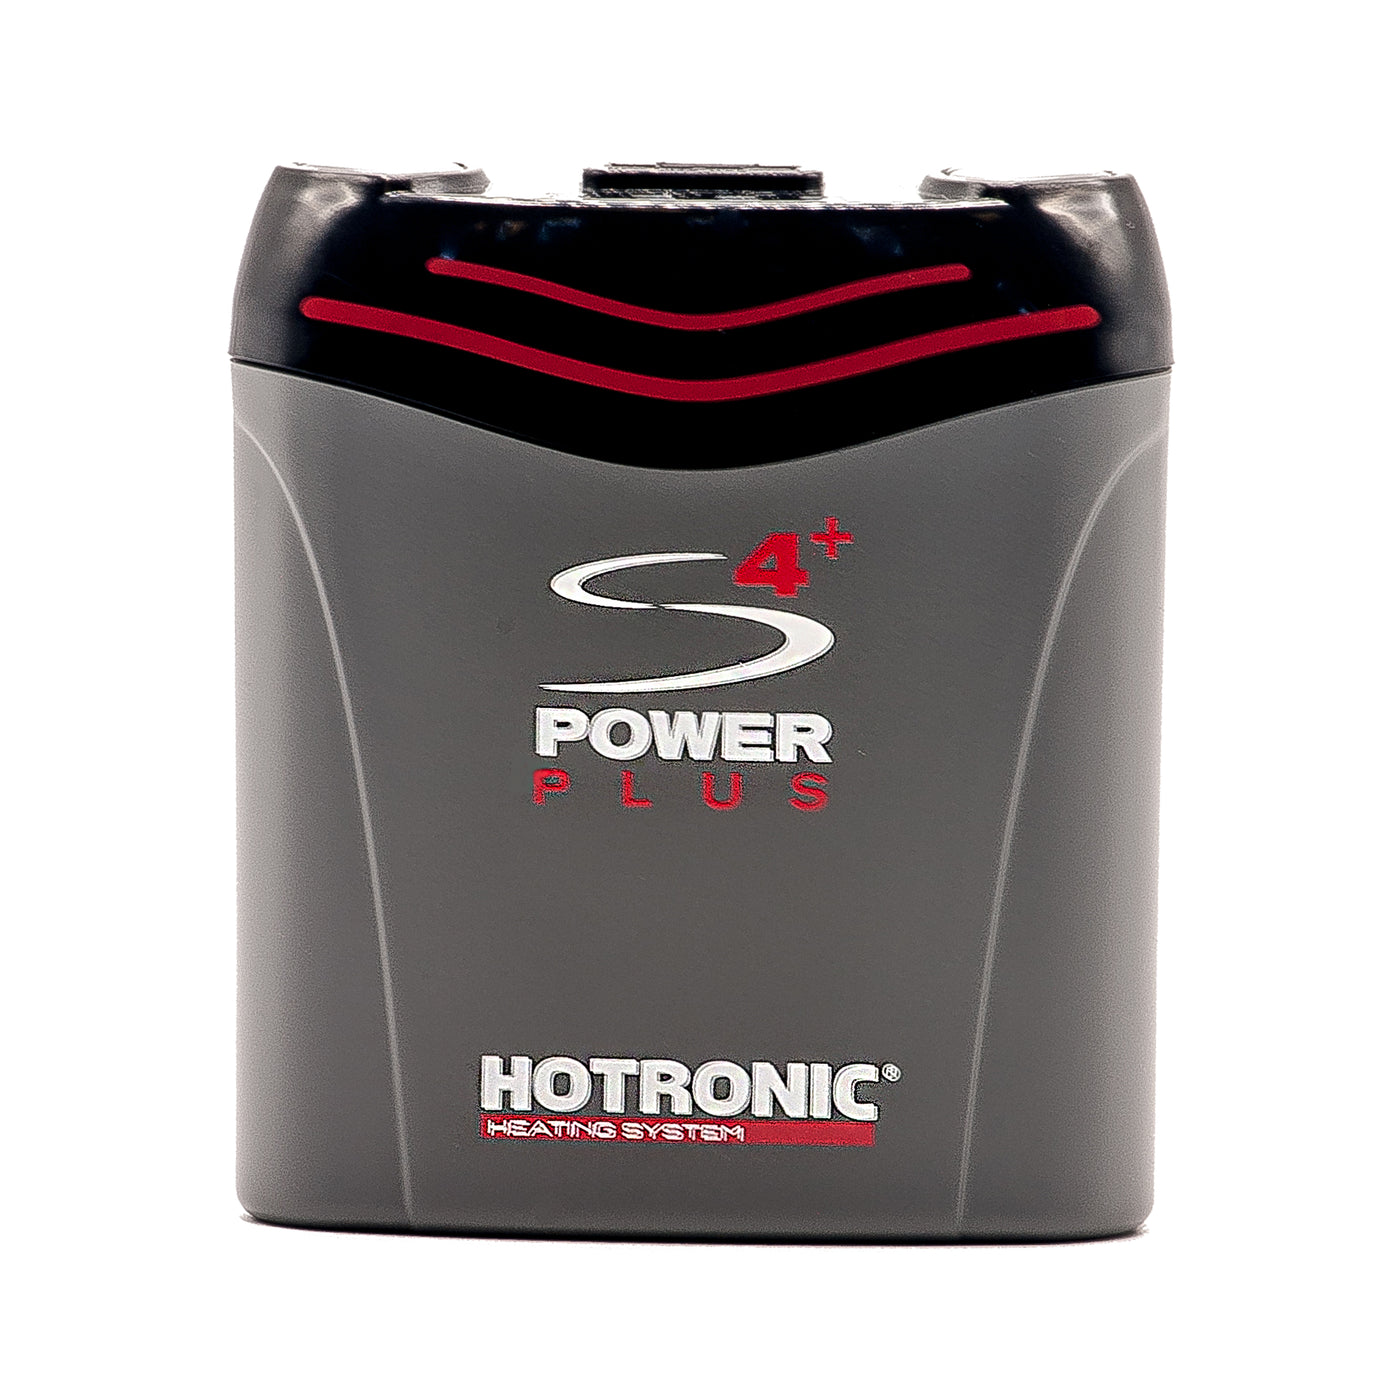 Hotronic Power Plus S4+ Battery Pack HEATED ACCESSORIES Hotronic   